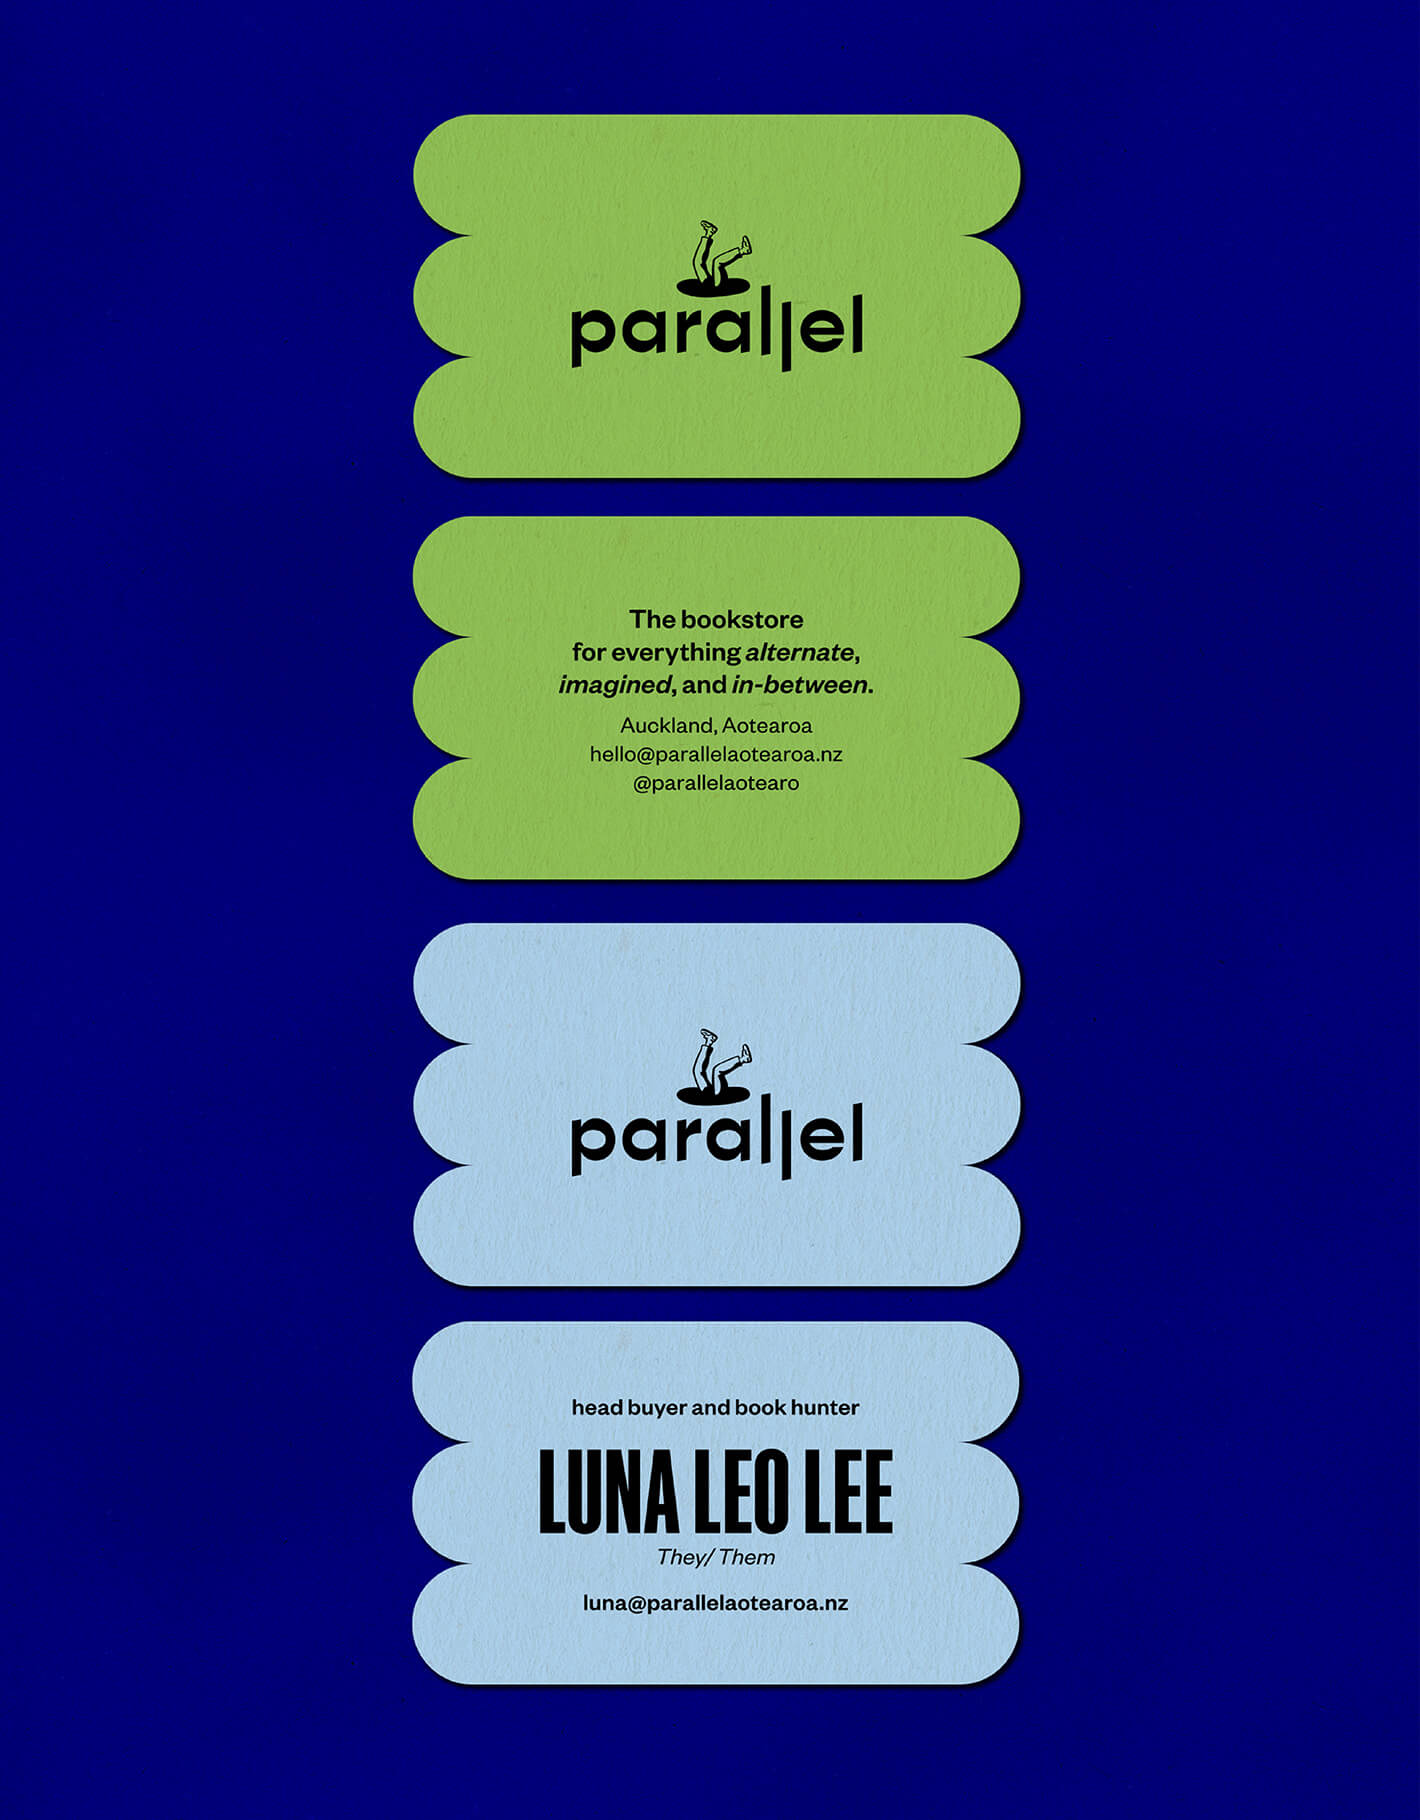 Brand identity case study for Parallel shows the two business cards. Both featuring a custom dieline and ‘blobby’ shape with a light green card being ‘generic’ for the store while a light blue one features contact details for founder Luna.